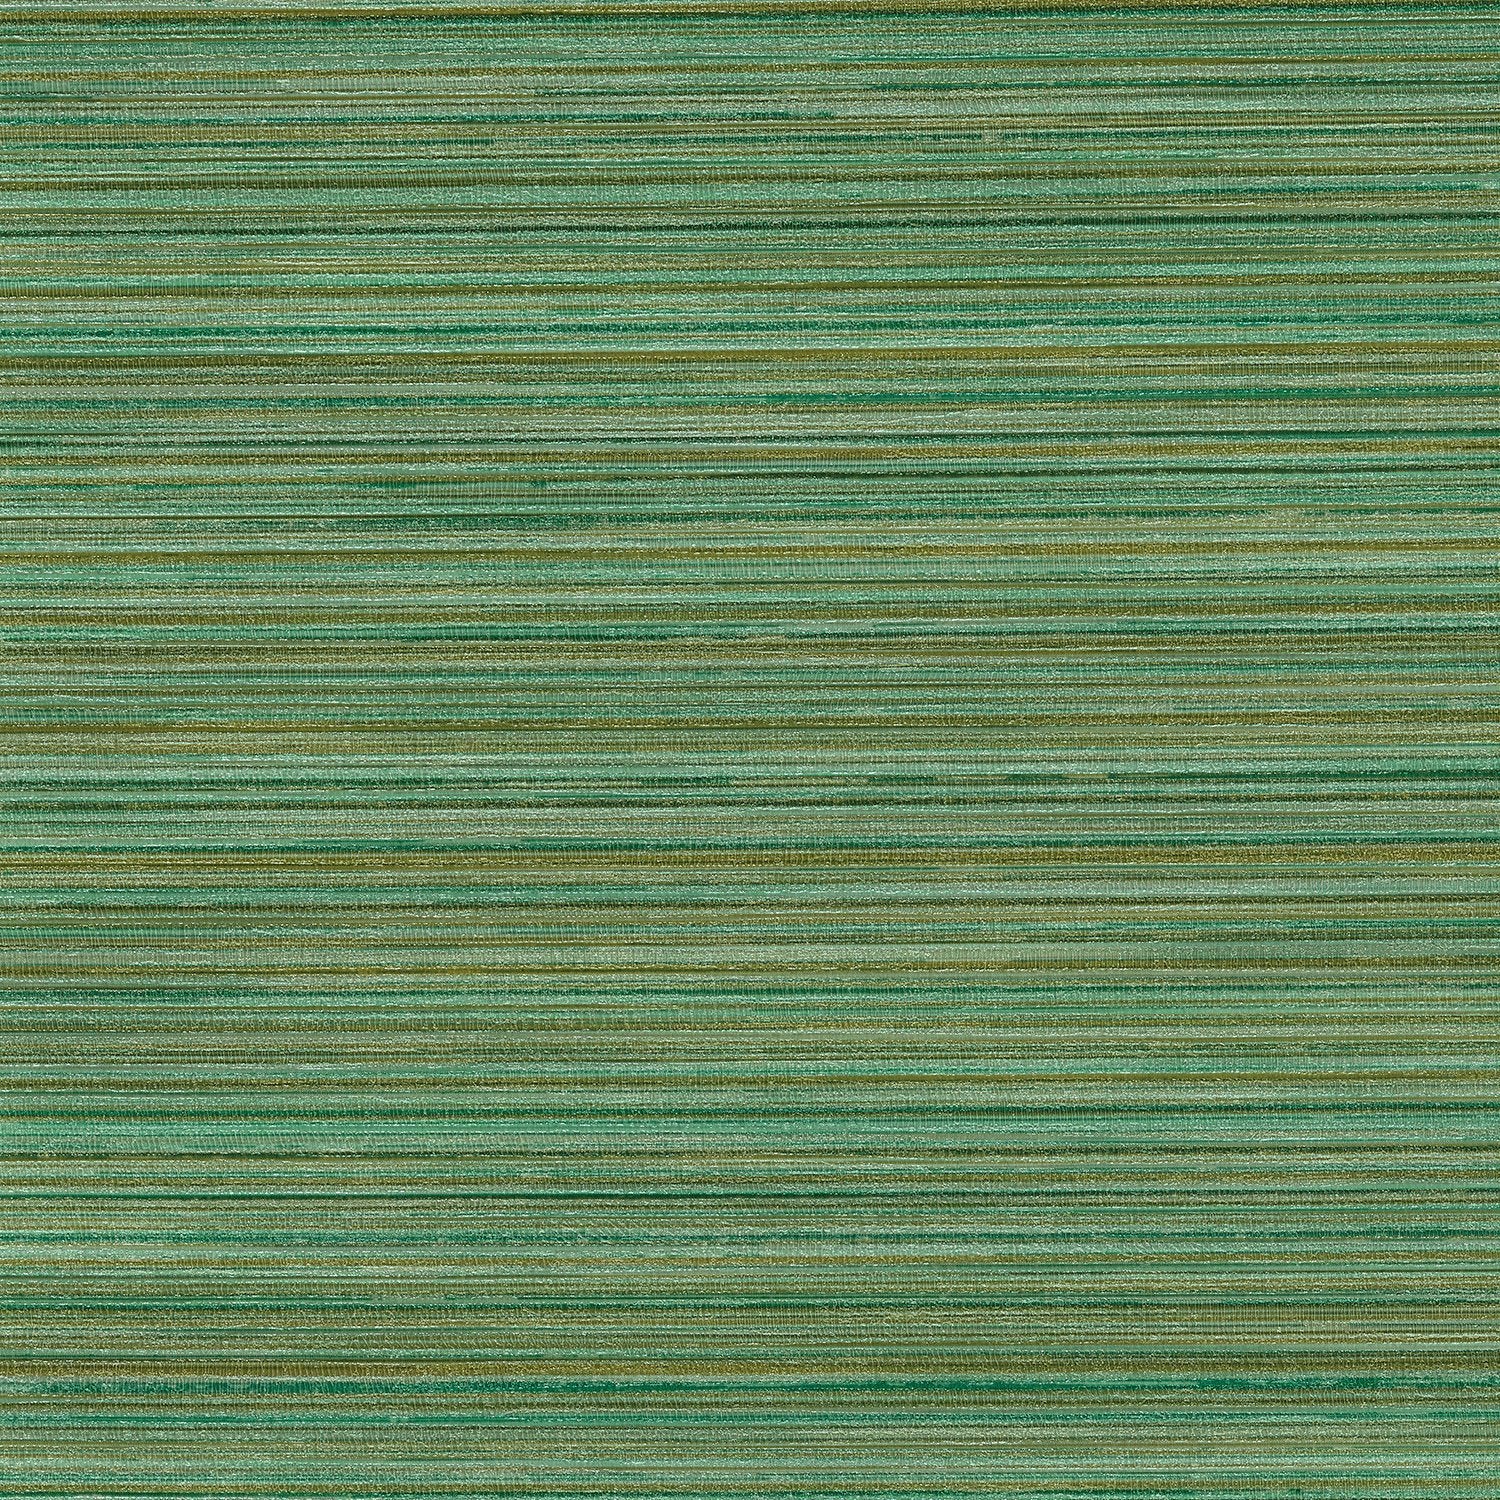 Gallery Silk - Y47747 Sap Green - Wallcovering - Vycon - Kube Contract